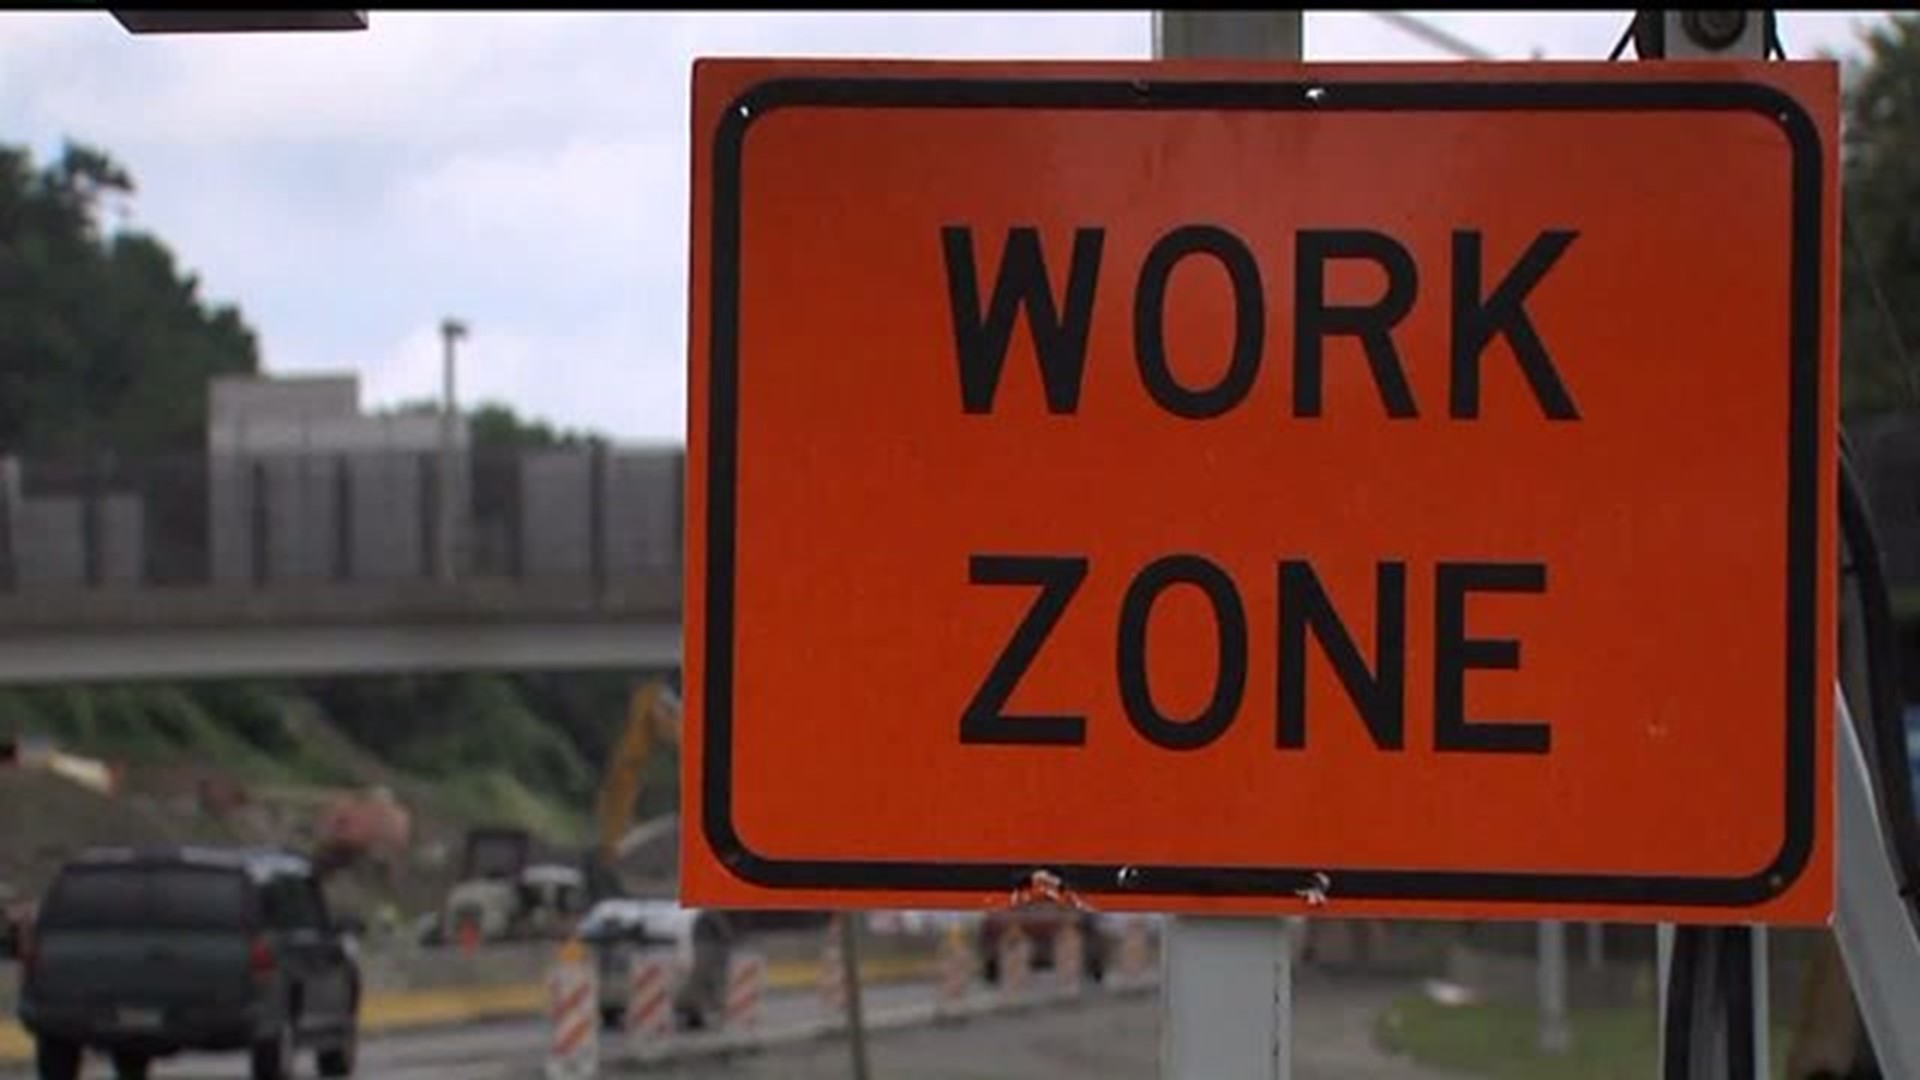 PennDOT starts several construction projects